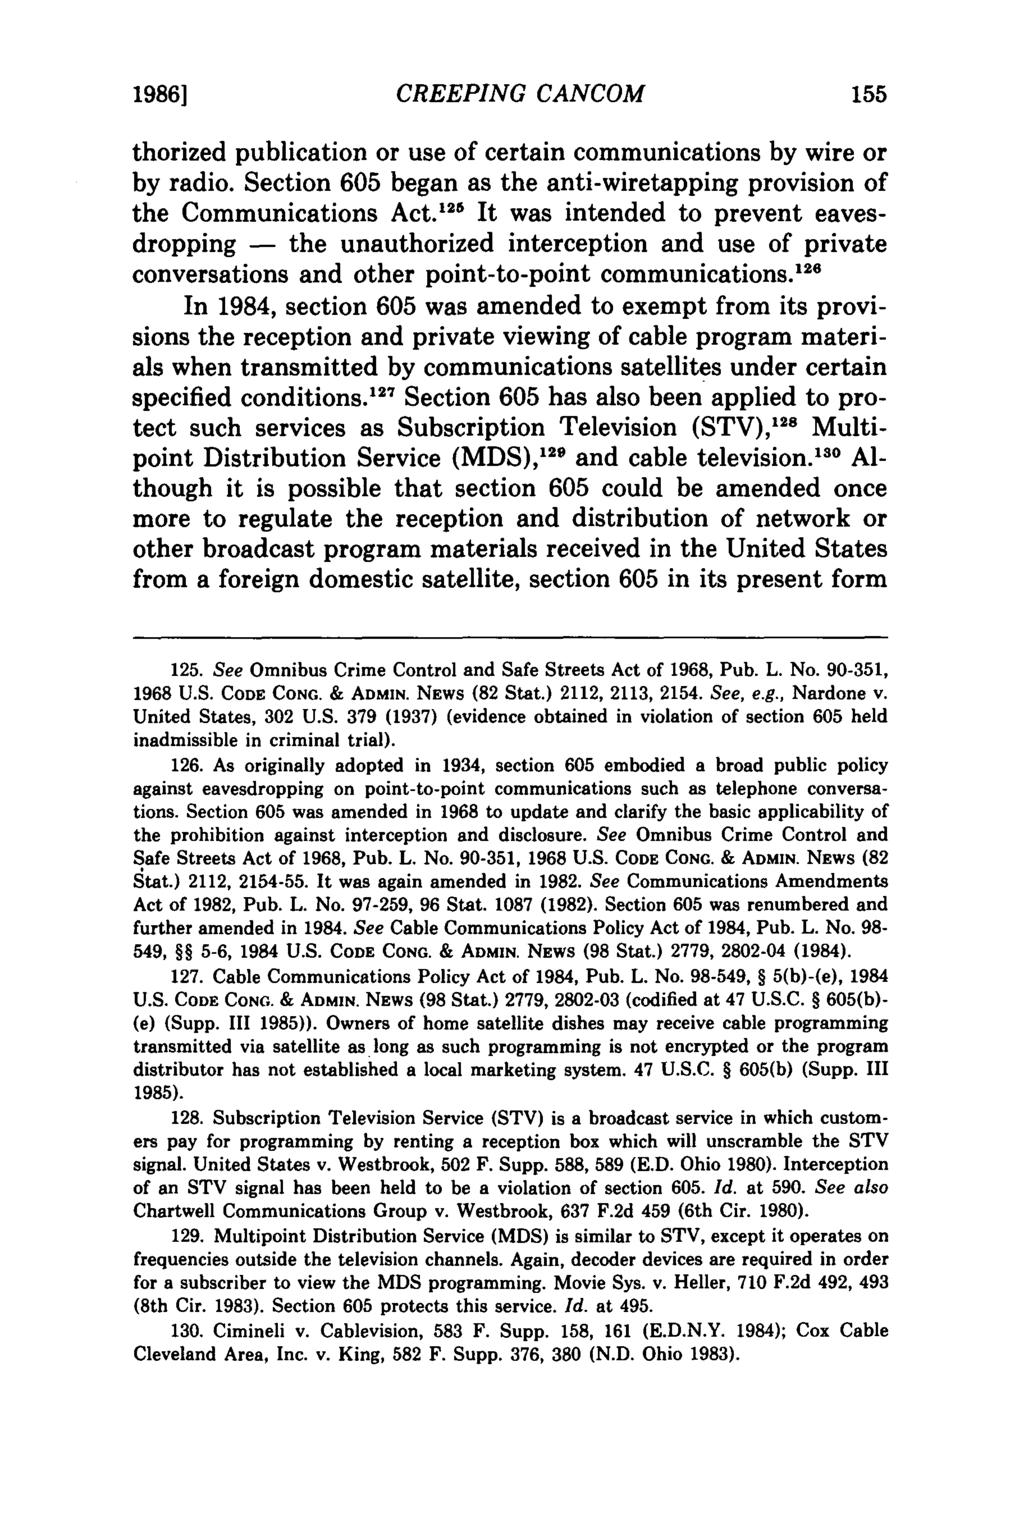 1986] CREEPING CANCOM thorized publication or use of certain communications by wire or by radio. Section 605 began as the anti-wiretapping provision of the Communications Act.